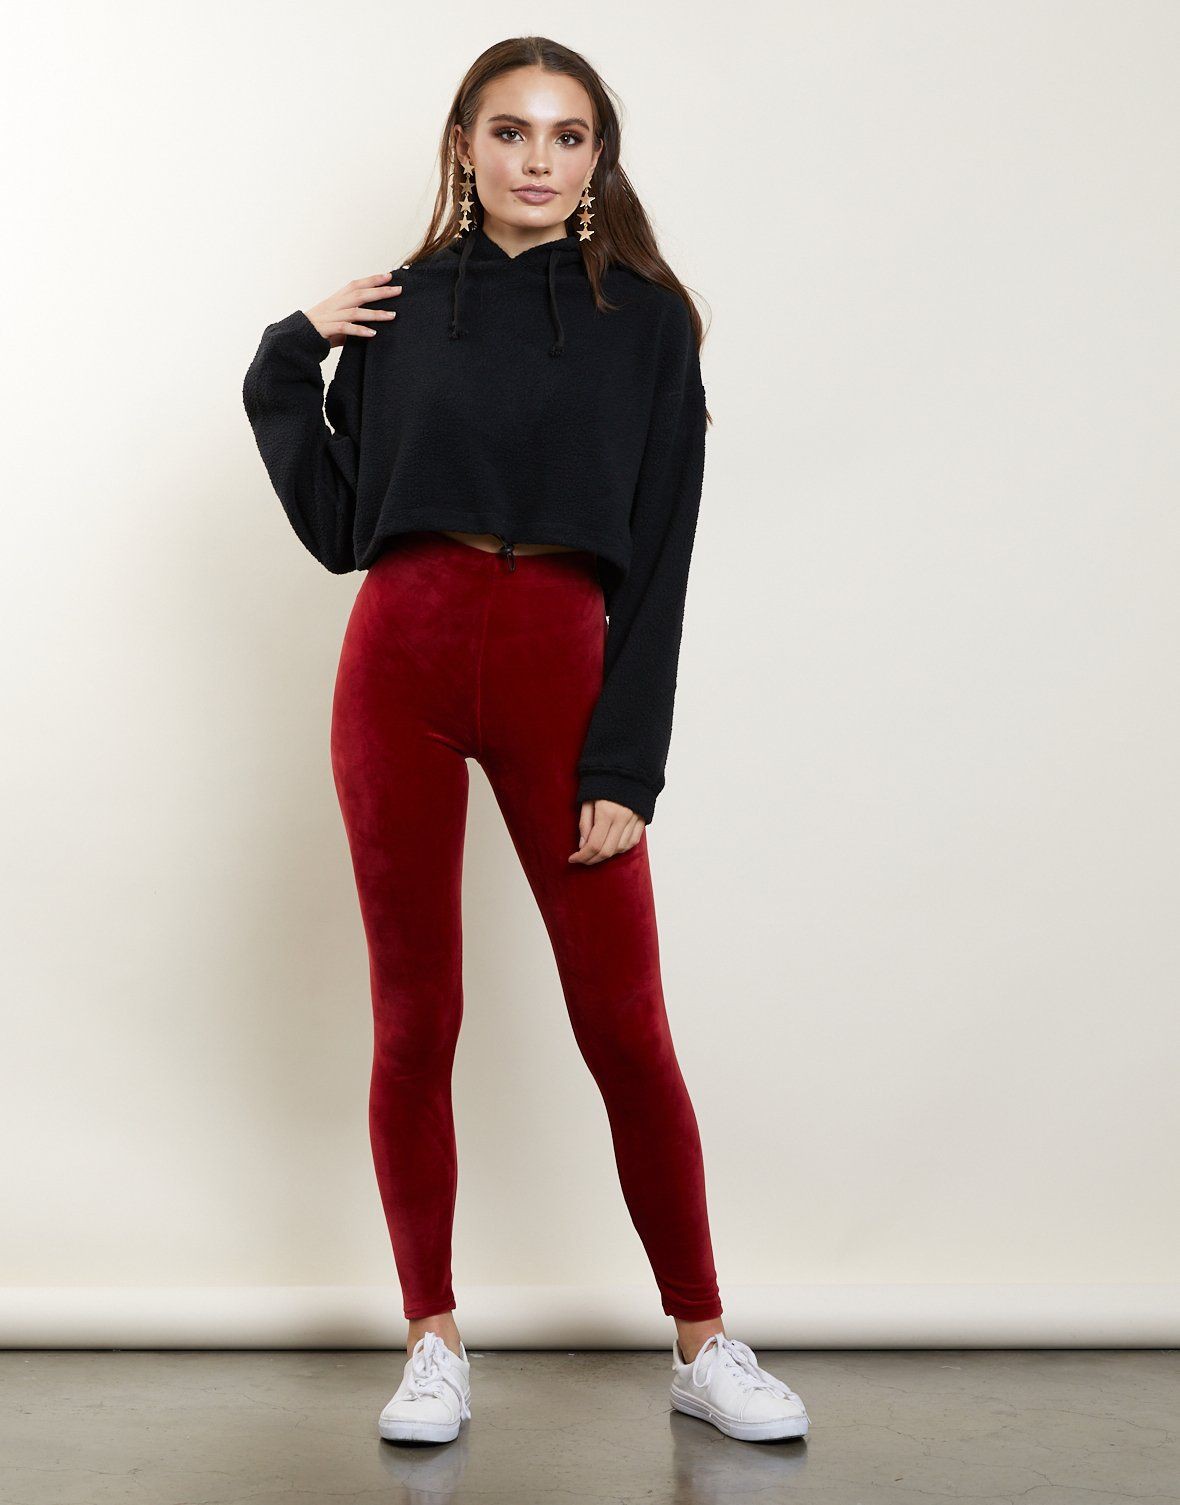 FAll/winter outfit red leggings outfit leopard outfit  Red leggings outfit,  Red leggings, Outfits with leggings